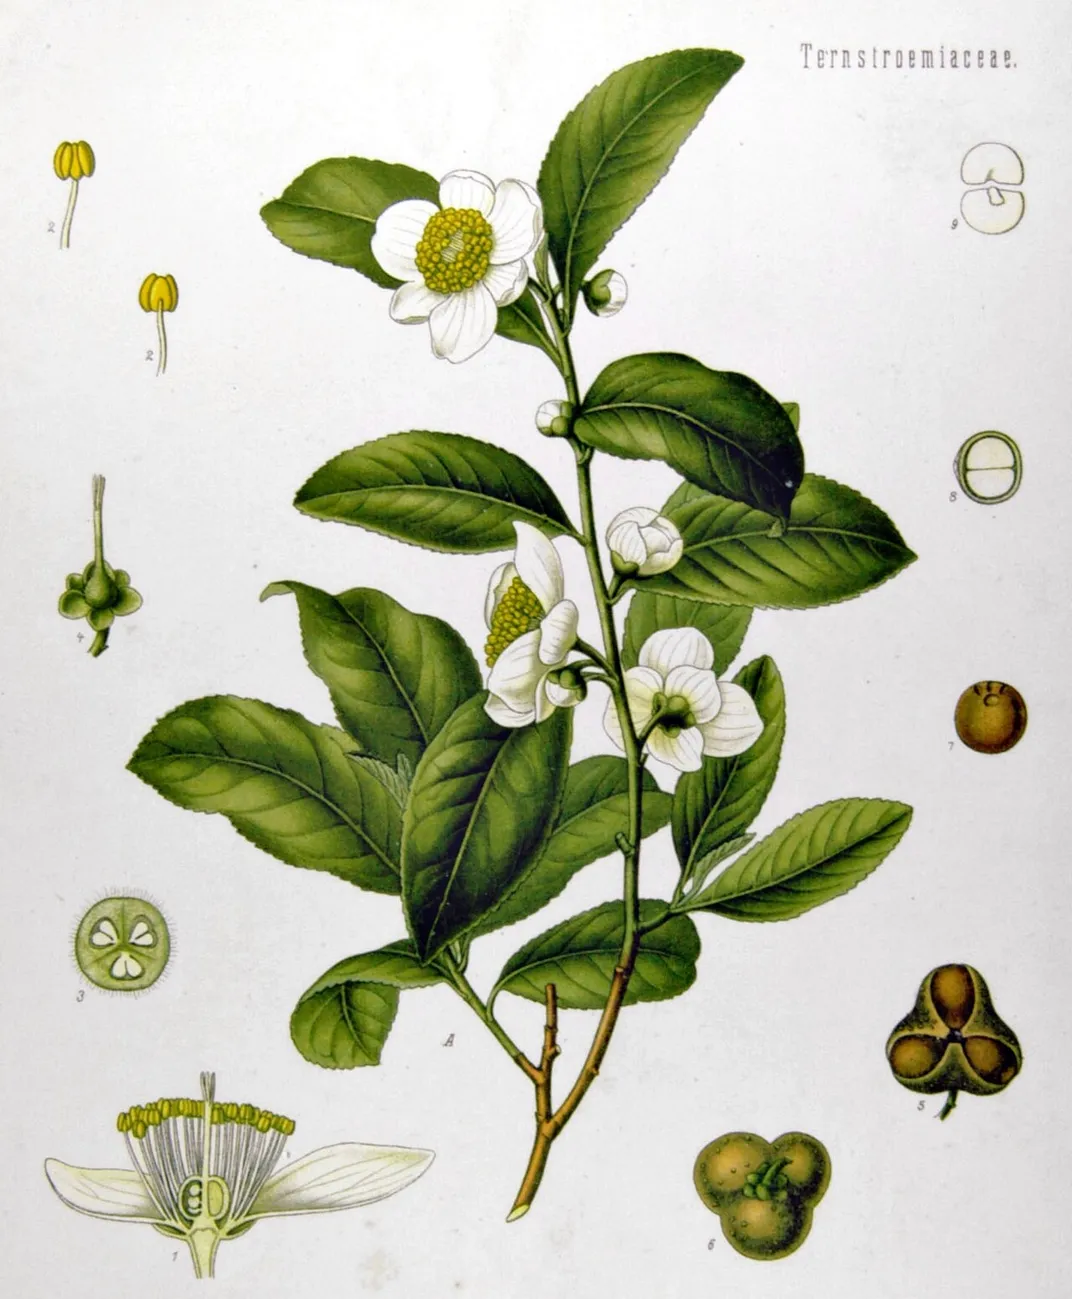 A drawing of the Camellia sinensis plant